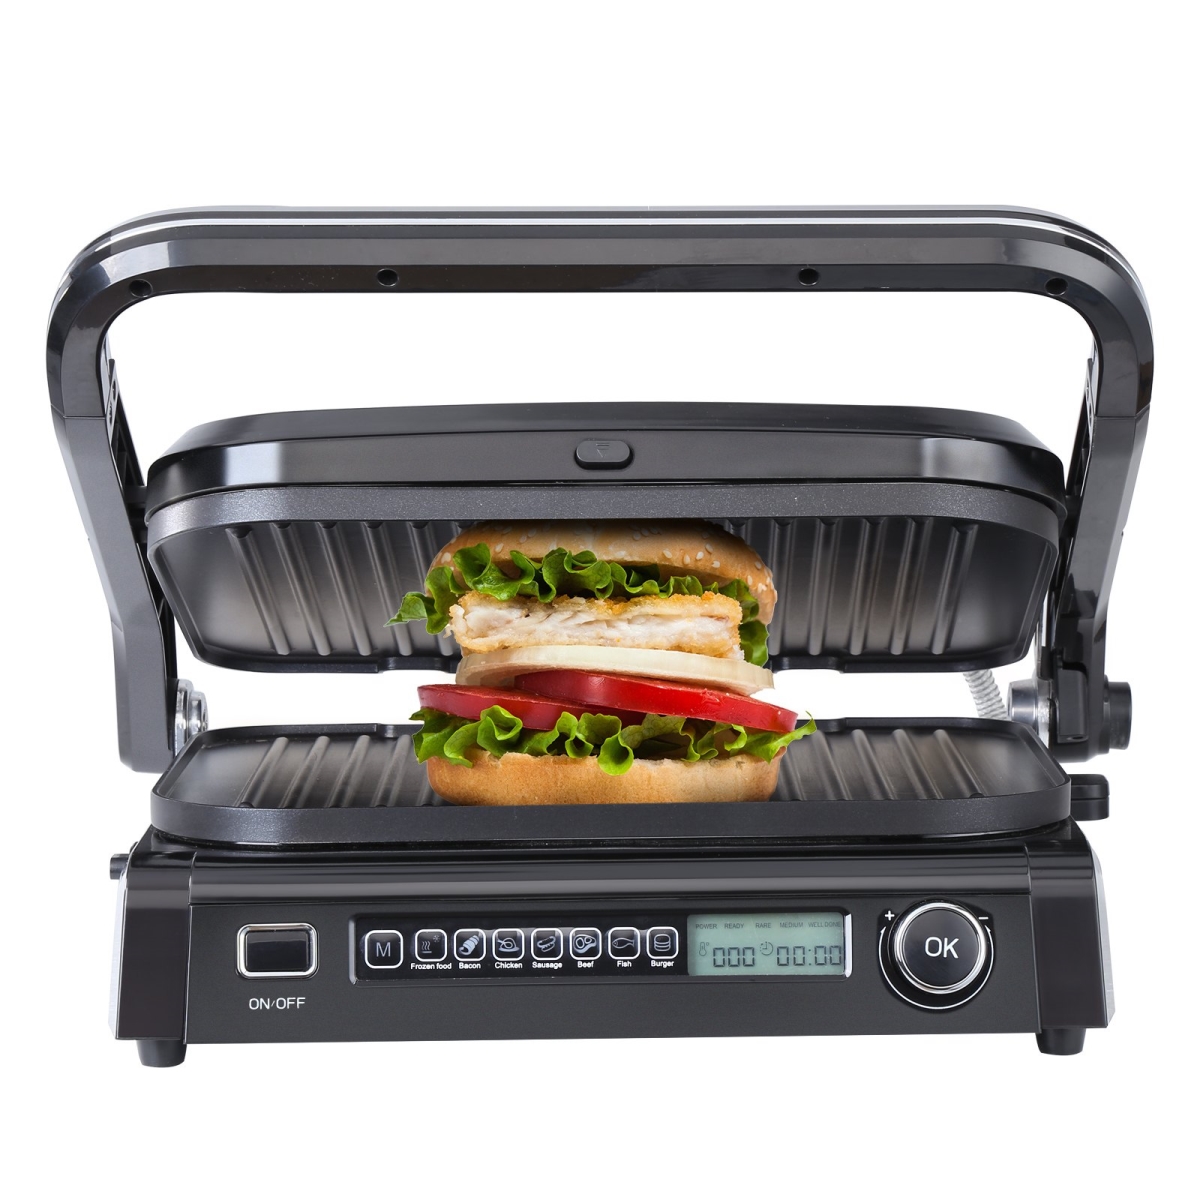 Picture of Vevor YBDBLDQPCDY13D7NZV1 14.4 in. 110V Commercial Electric Griddle 1800W Indoor Countertop Grill Stainless Steel Grill Sandwich Maker